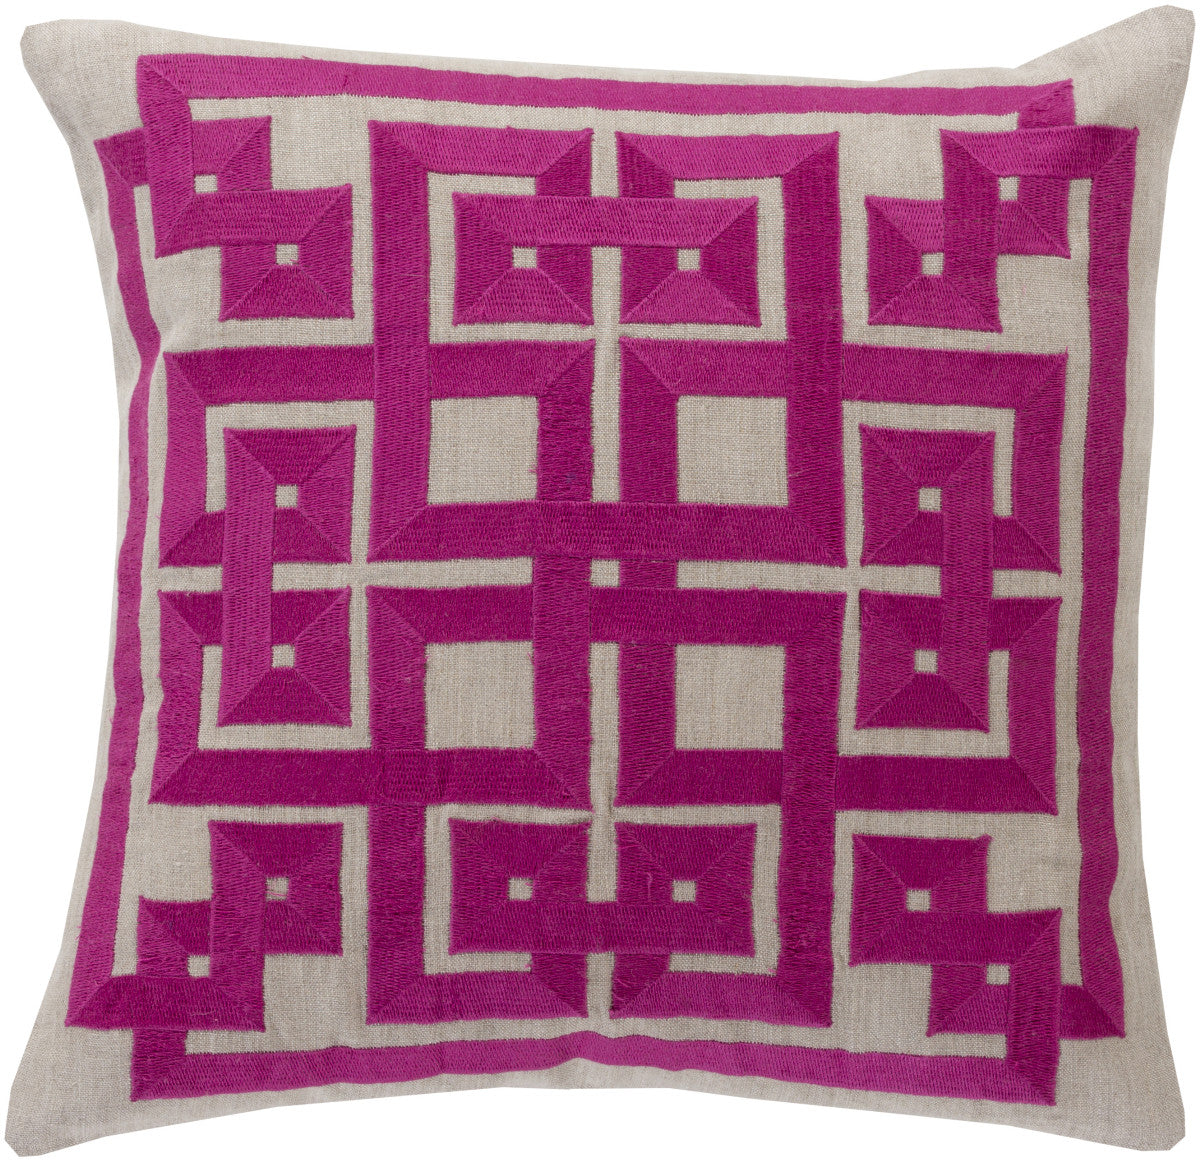 Surya Gramercy Intersected Geometrics LD-008 Pillow by Beth Lacefield